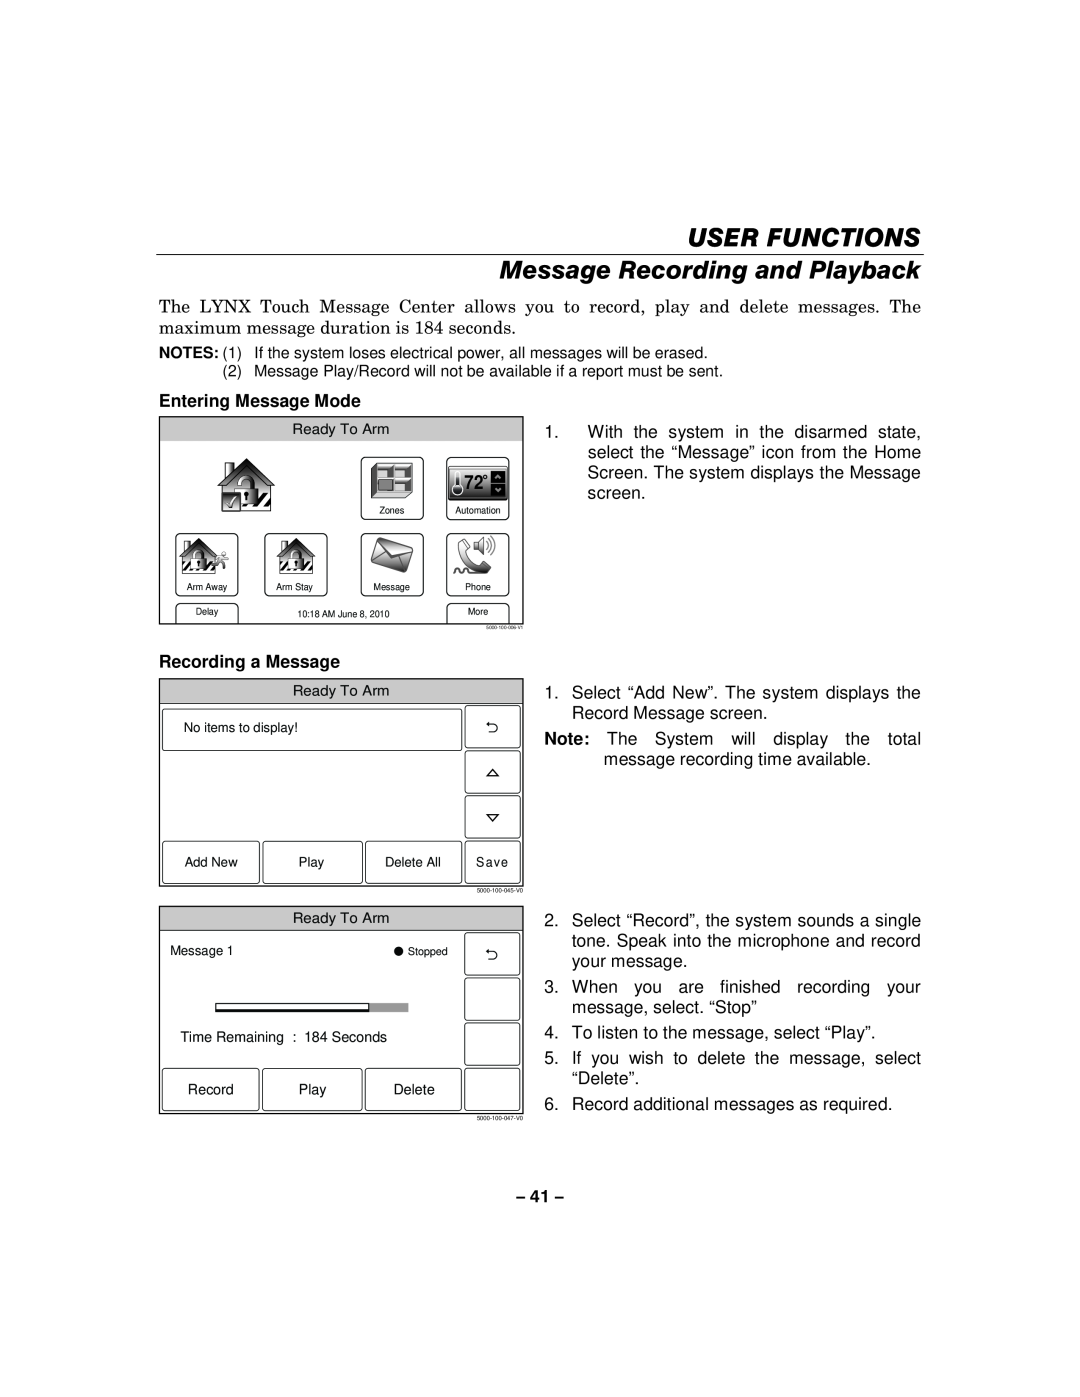 Honeywell L5100 manual USER FUNCTIONS Message Recording and Playback, Entering Message Mode, Recording a Message 